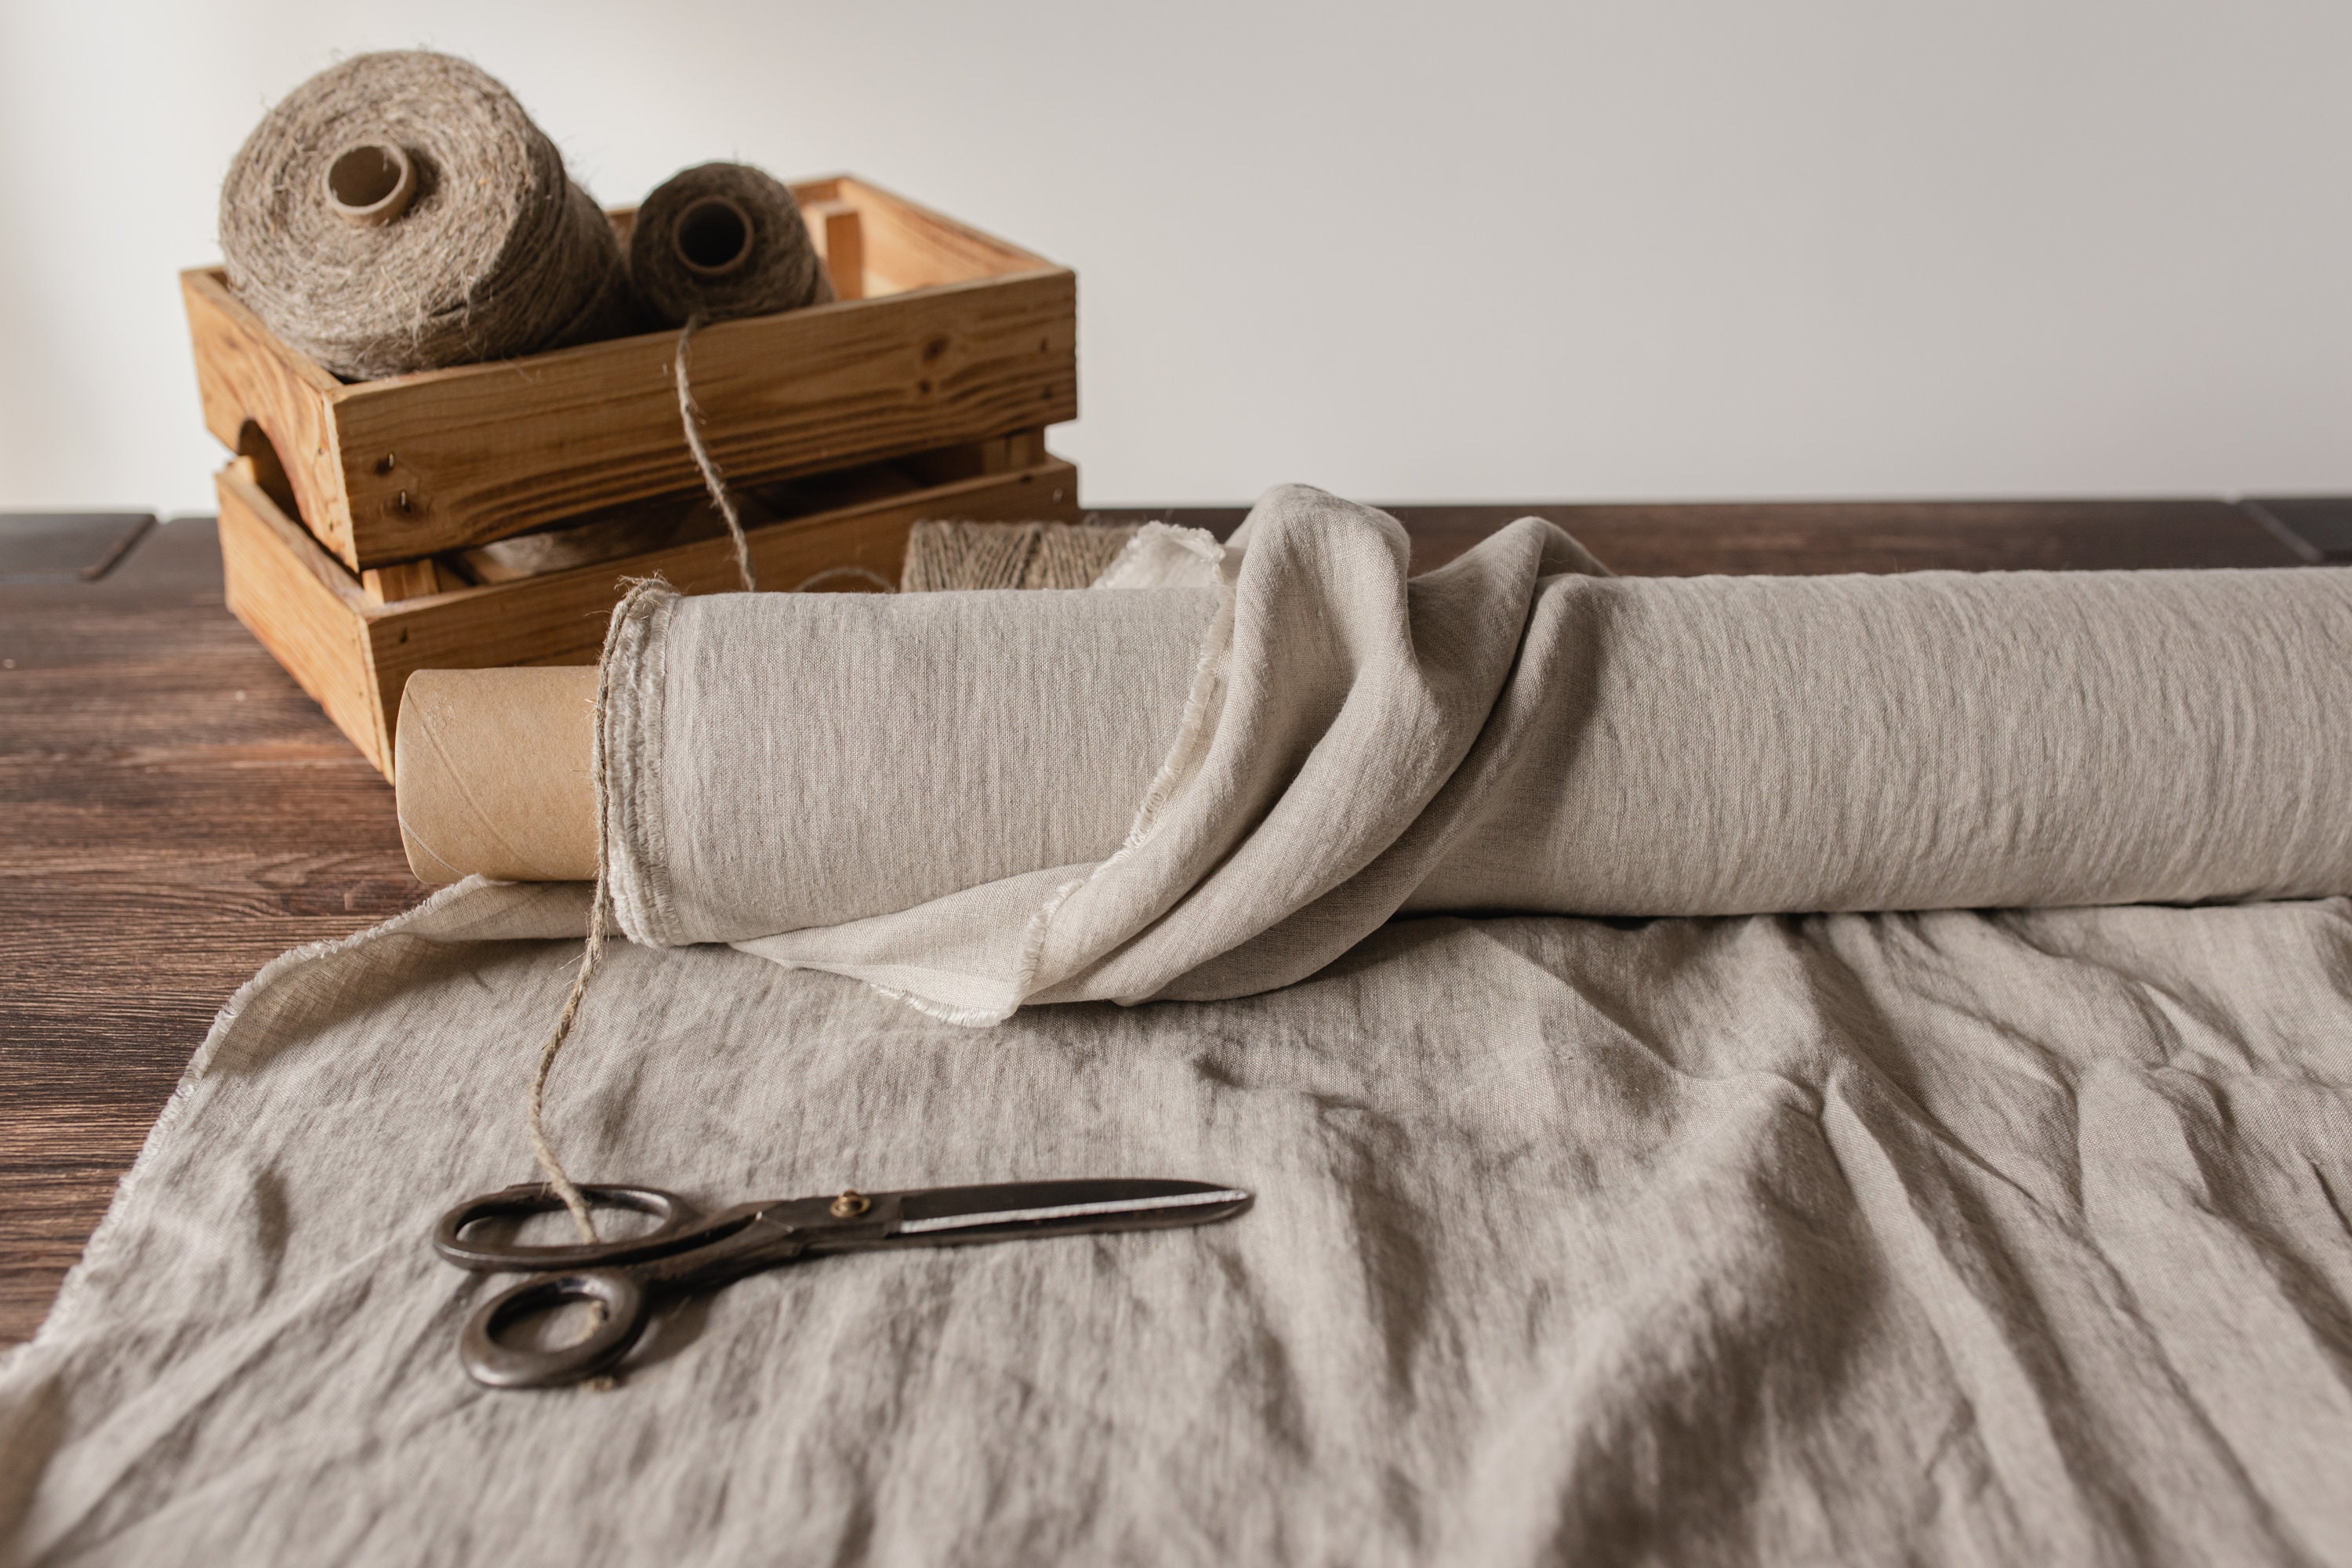 Natural undyed linen fabric, Fabric by the yard or meter, Washed